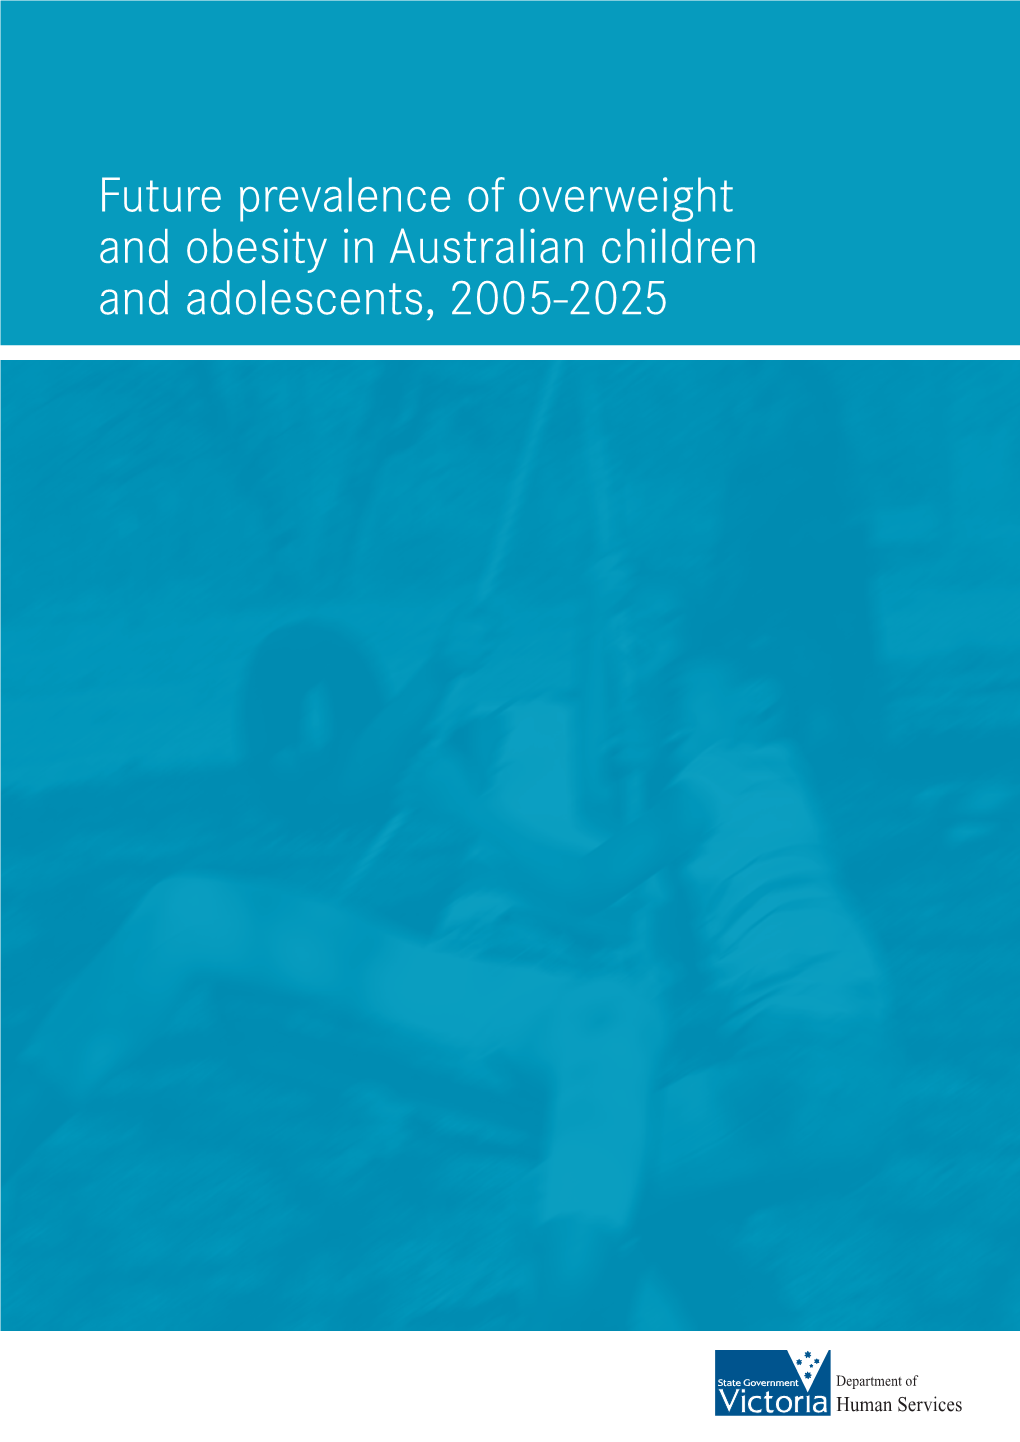 Future Prevalence of Overweight and Obesity in Australian Children And